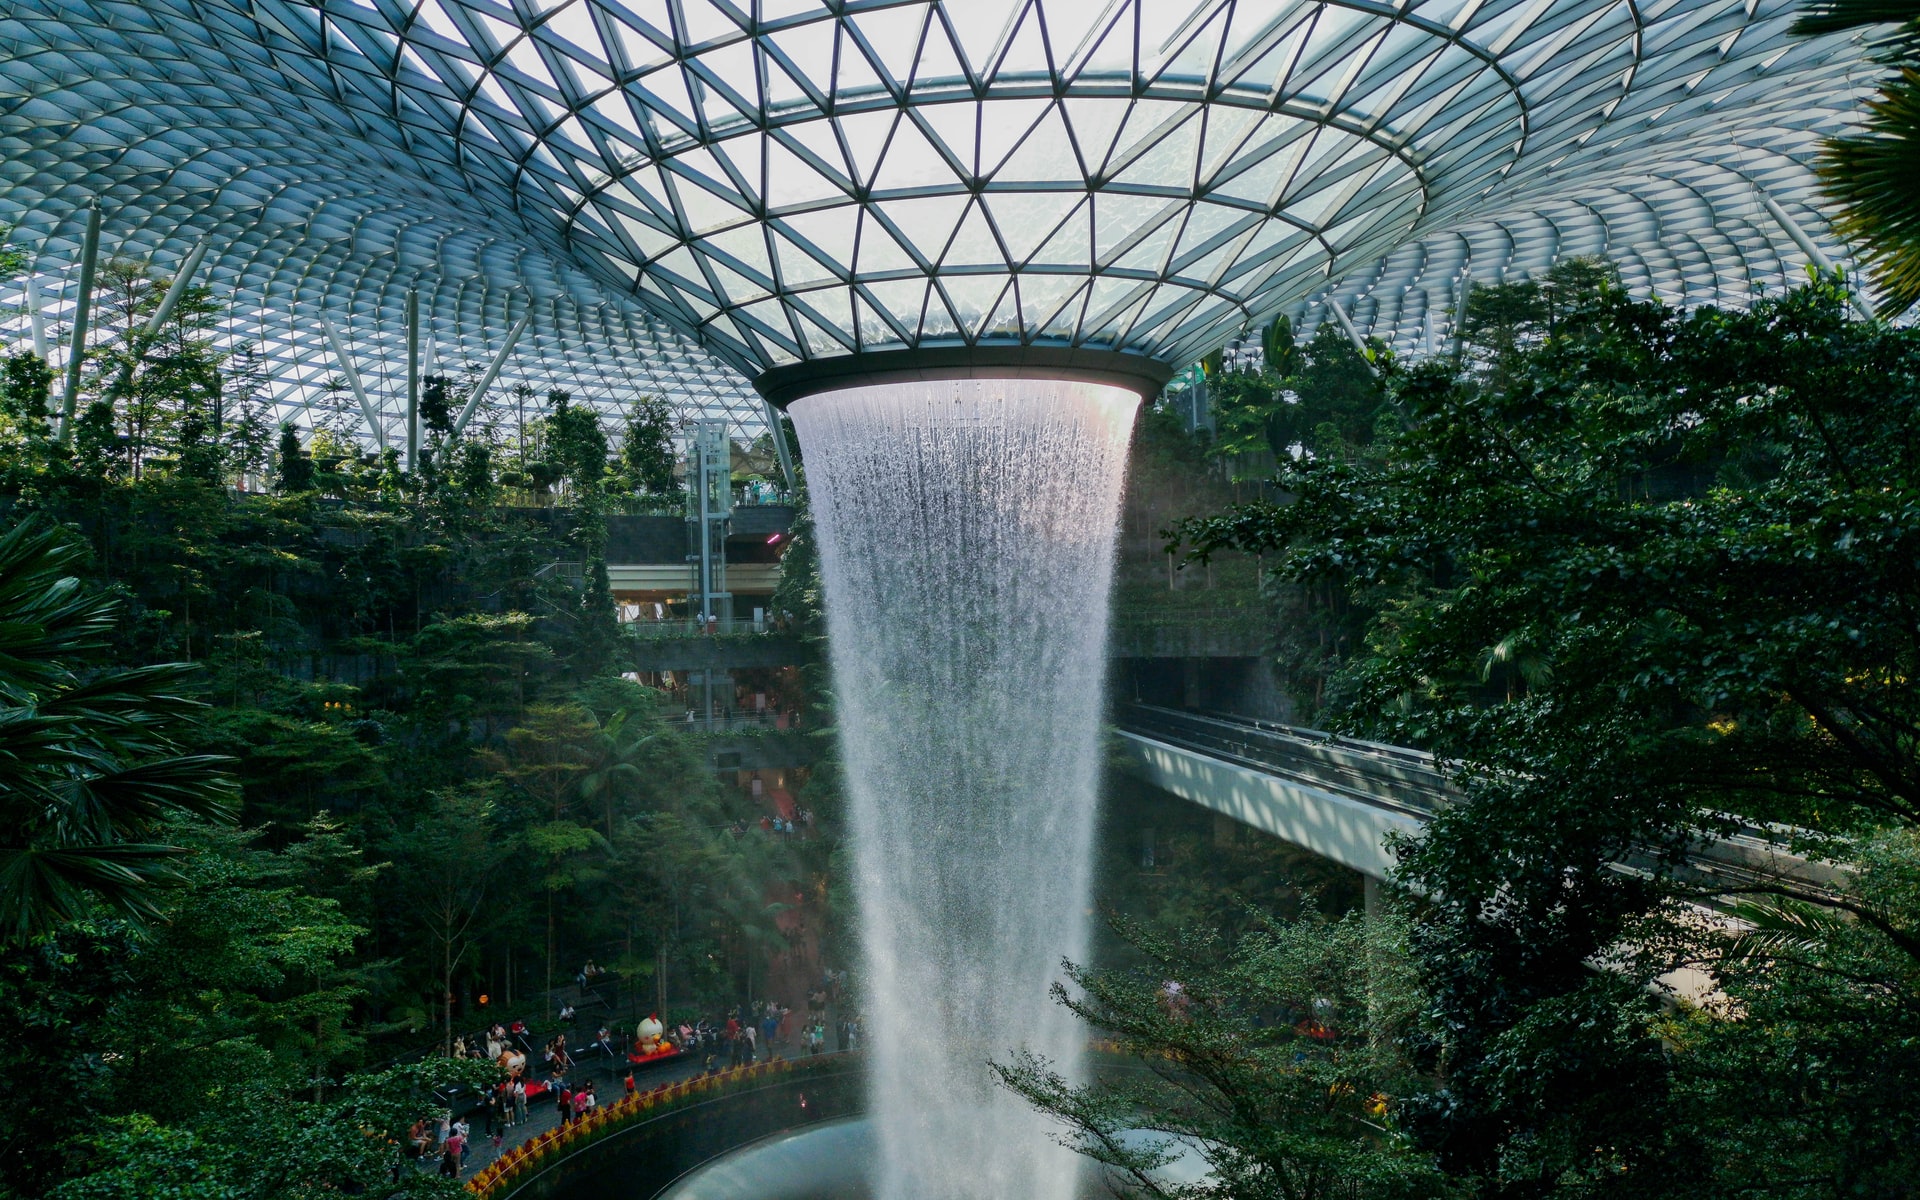 Singapore Guide: Changi Airport crowned world's best airport